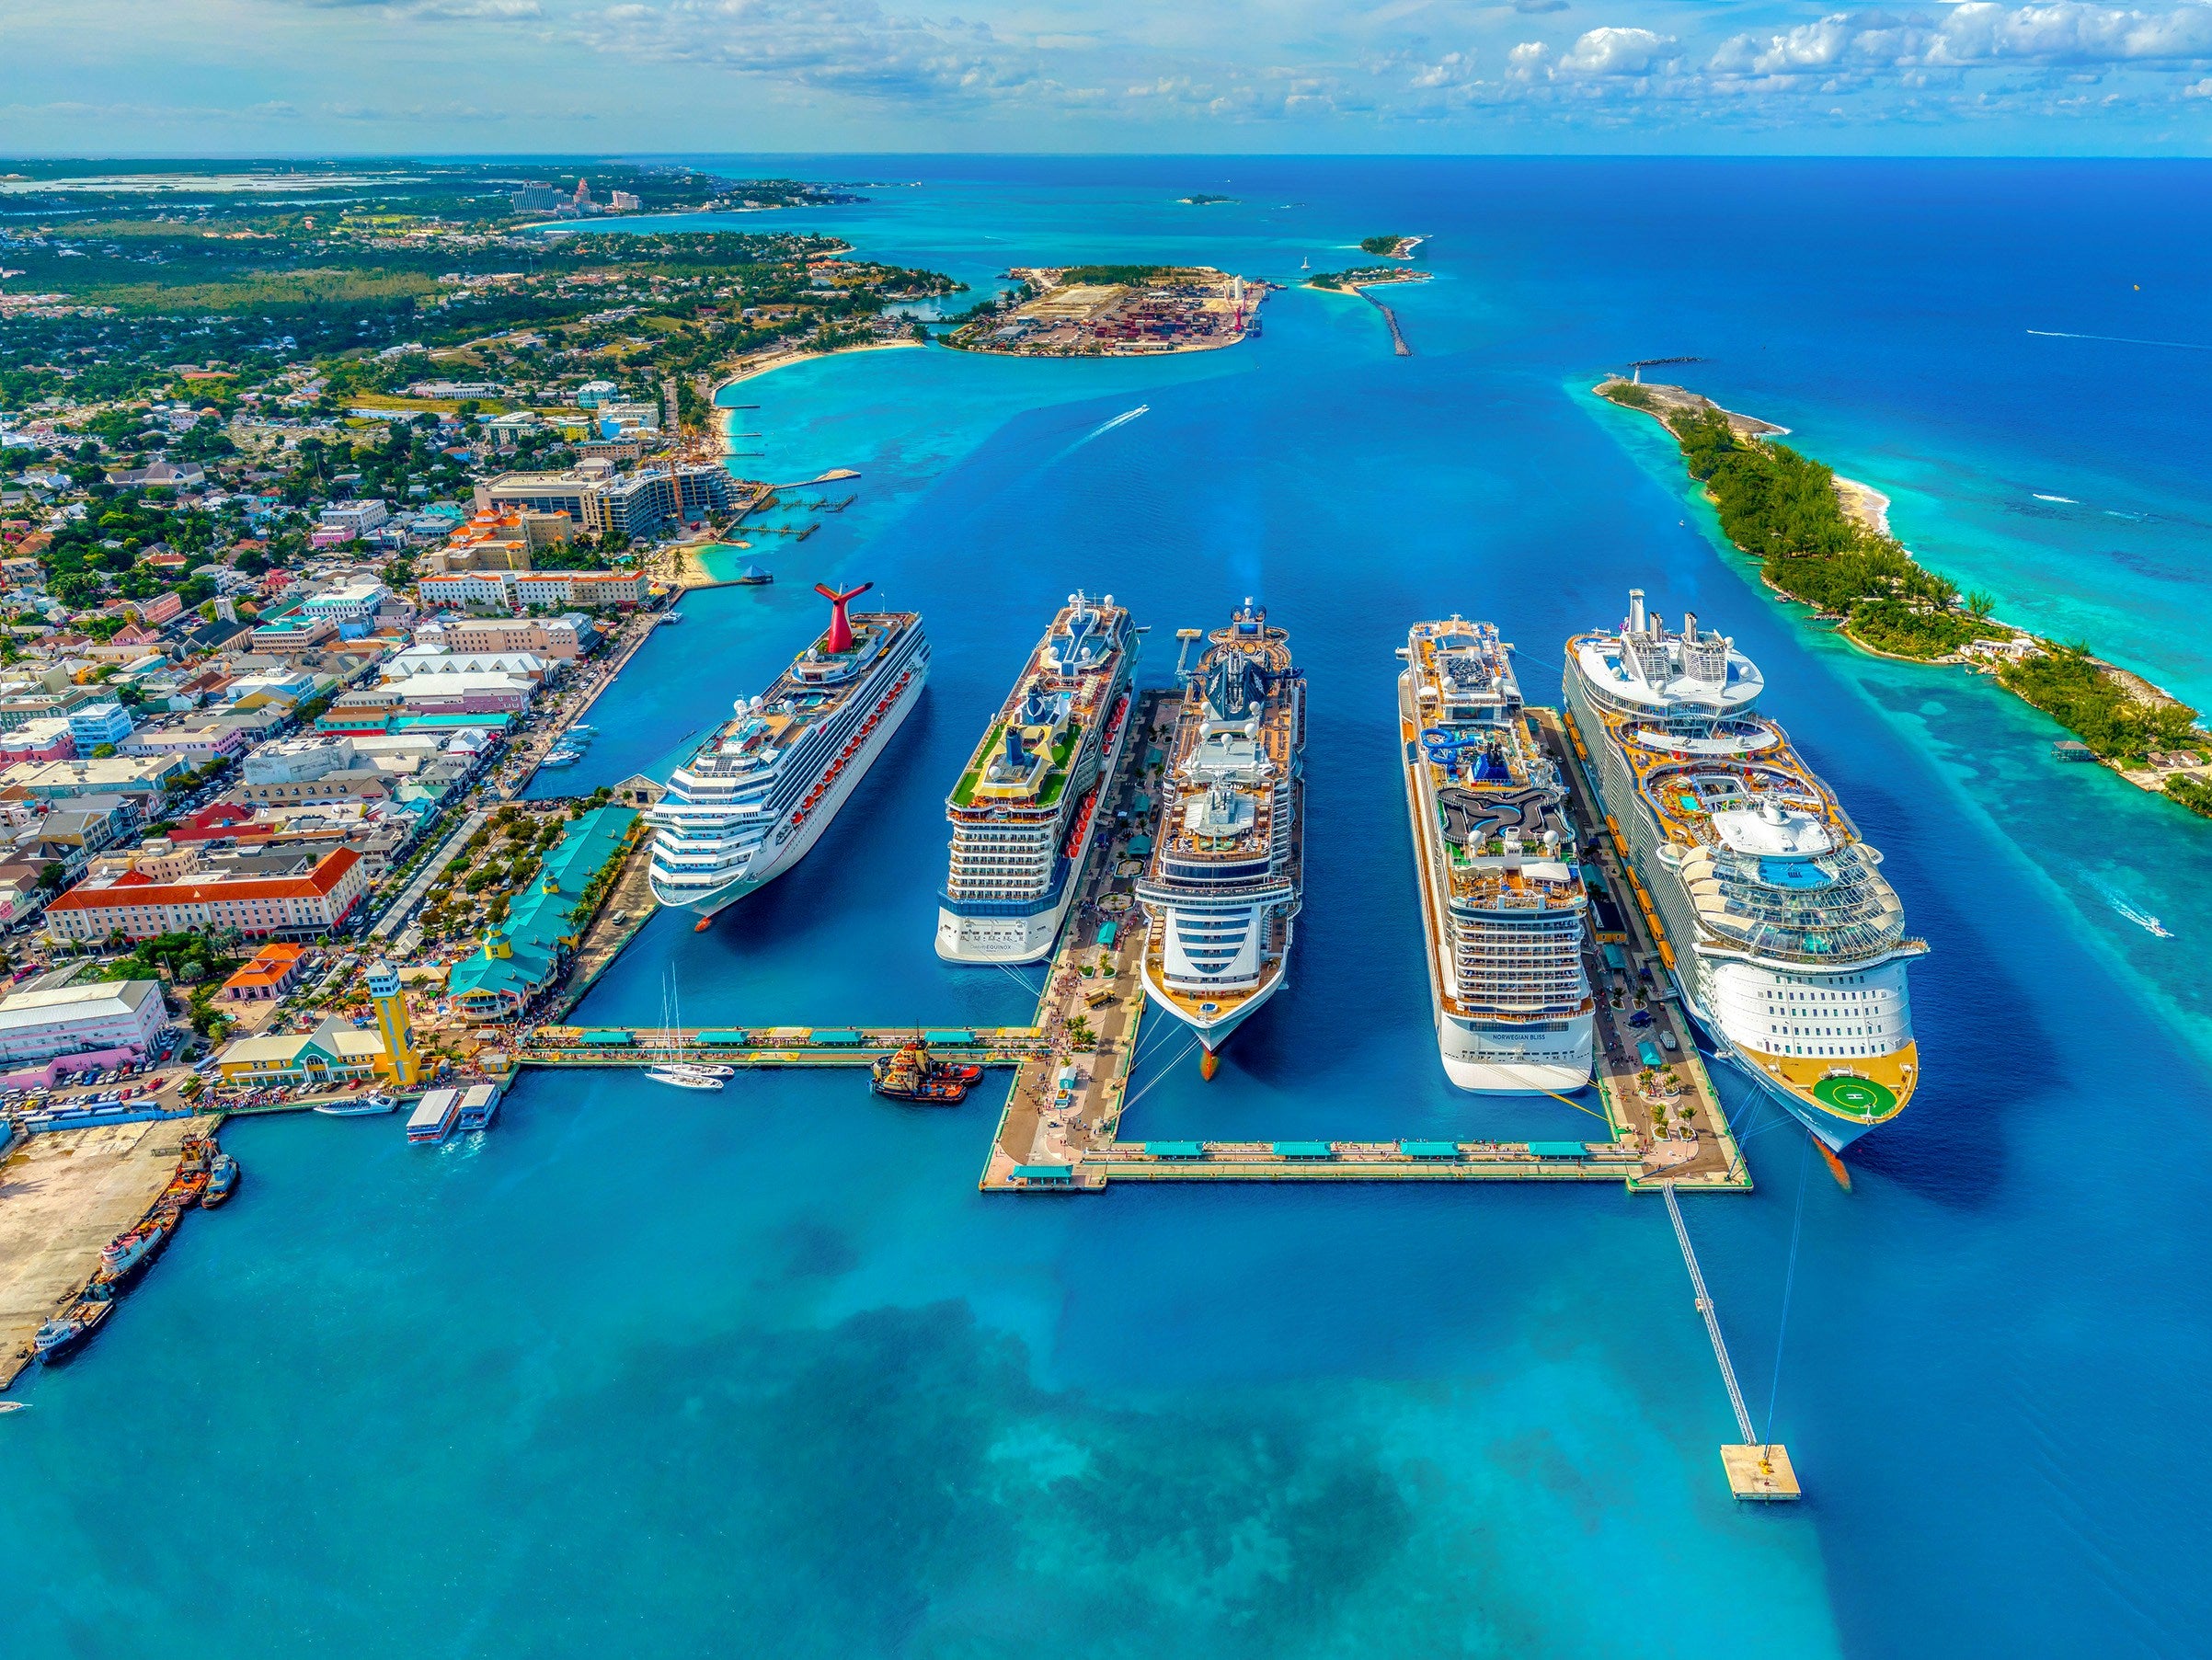 Set sail with P&O and Disney Cruise Lines to the Caribbean islands